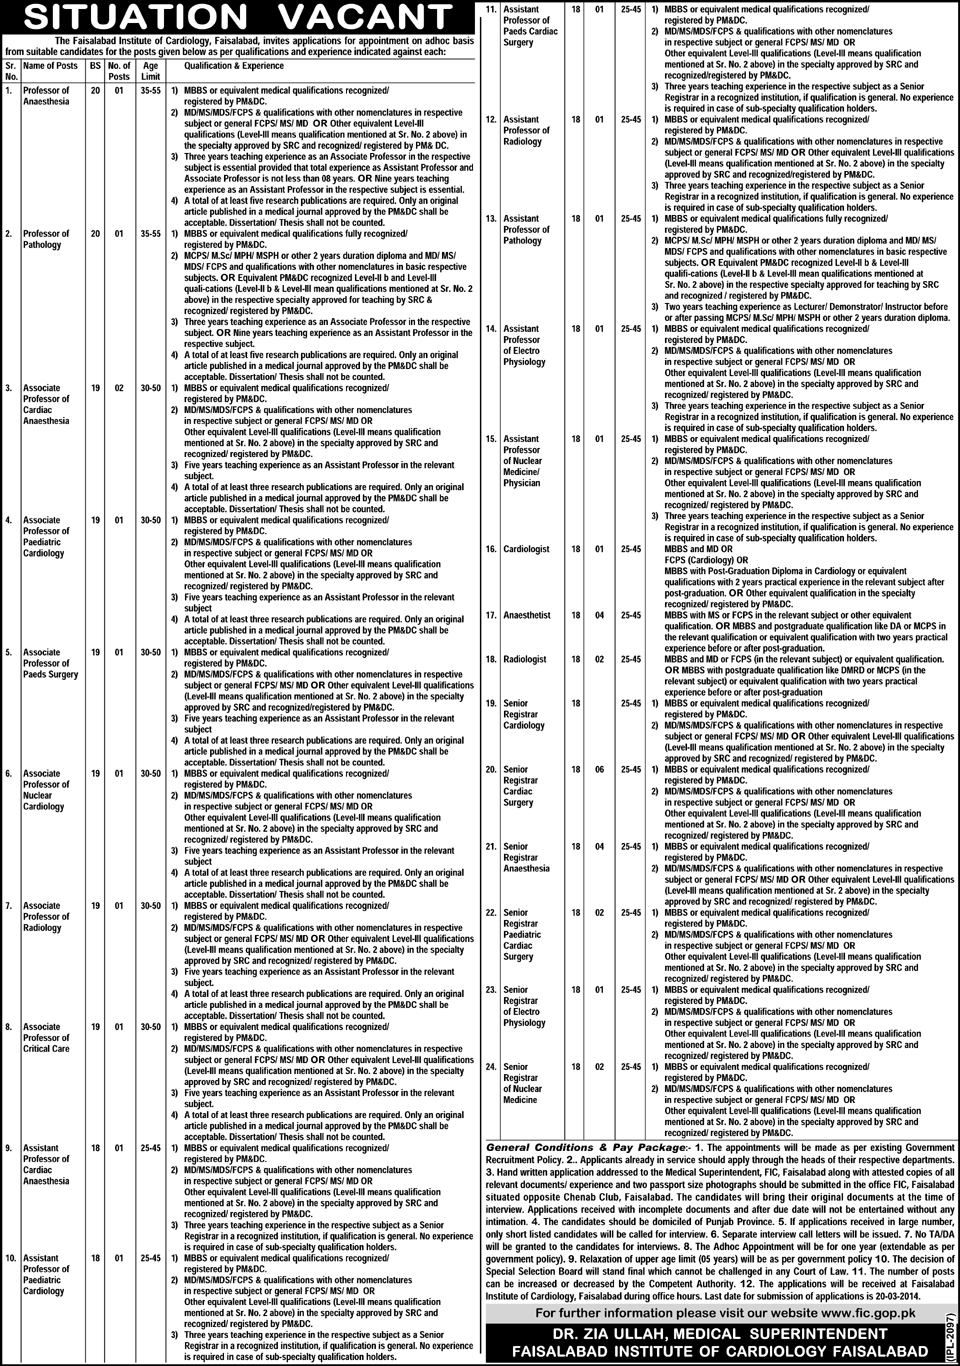 Faisalabad Institute of Cardiology Jobs 2014 February for Medical Faculty